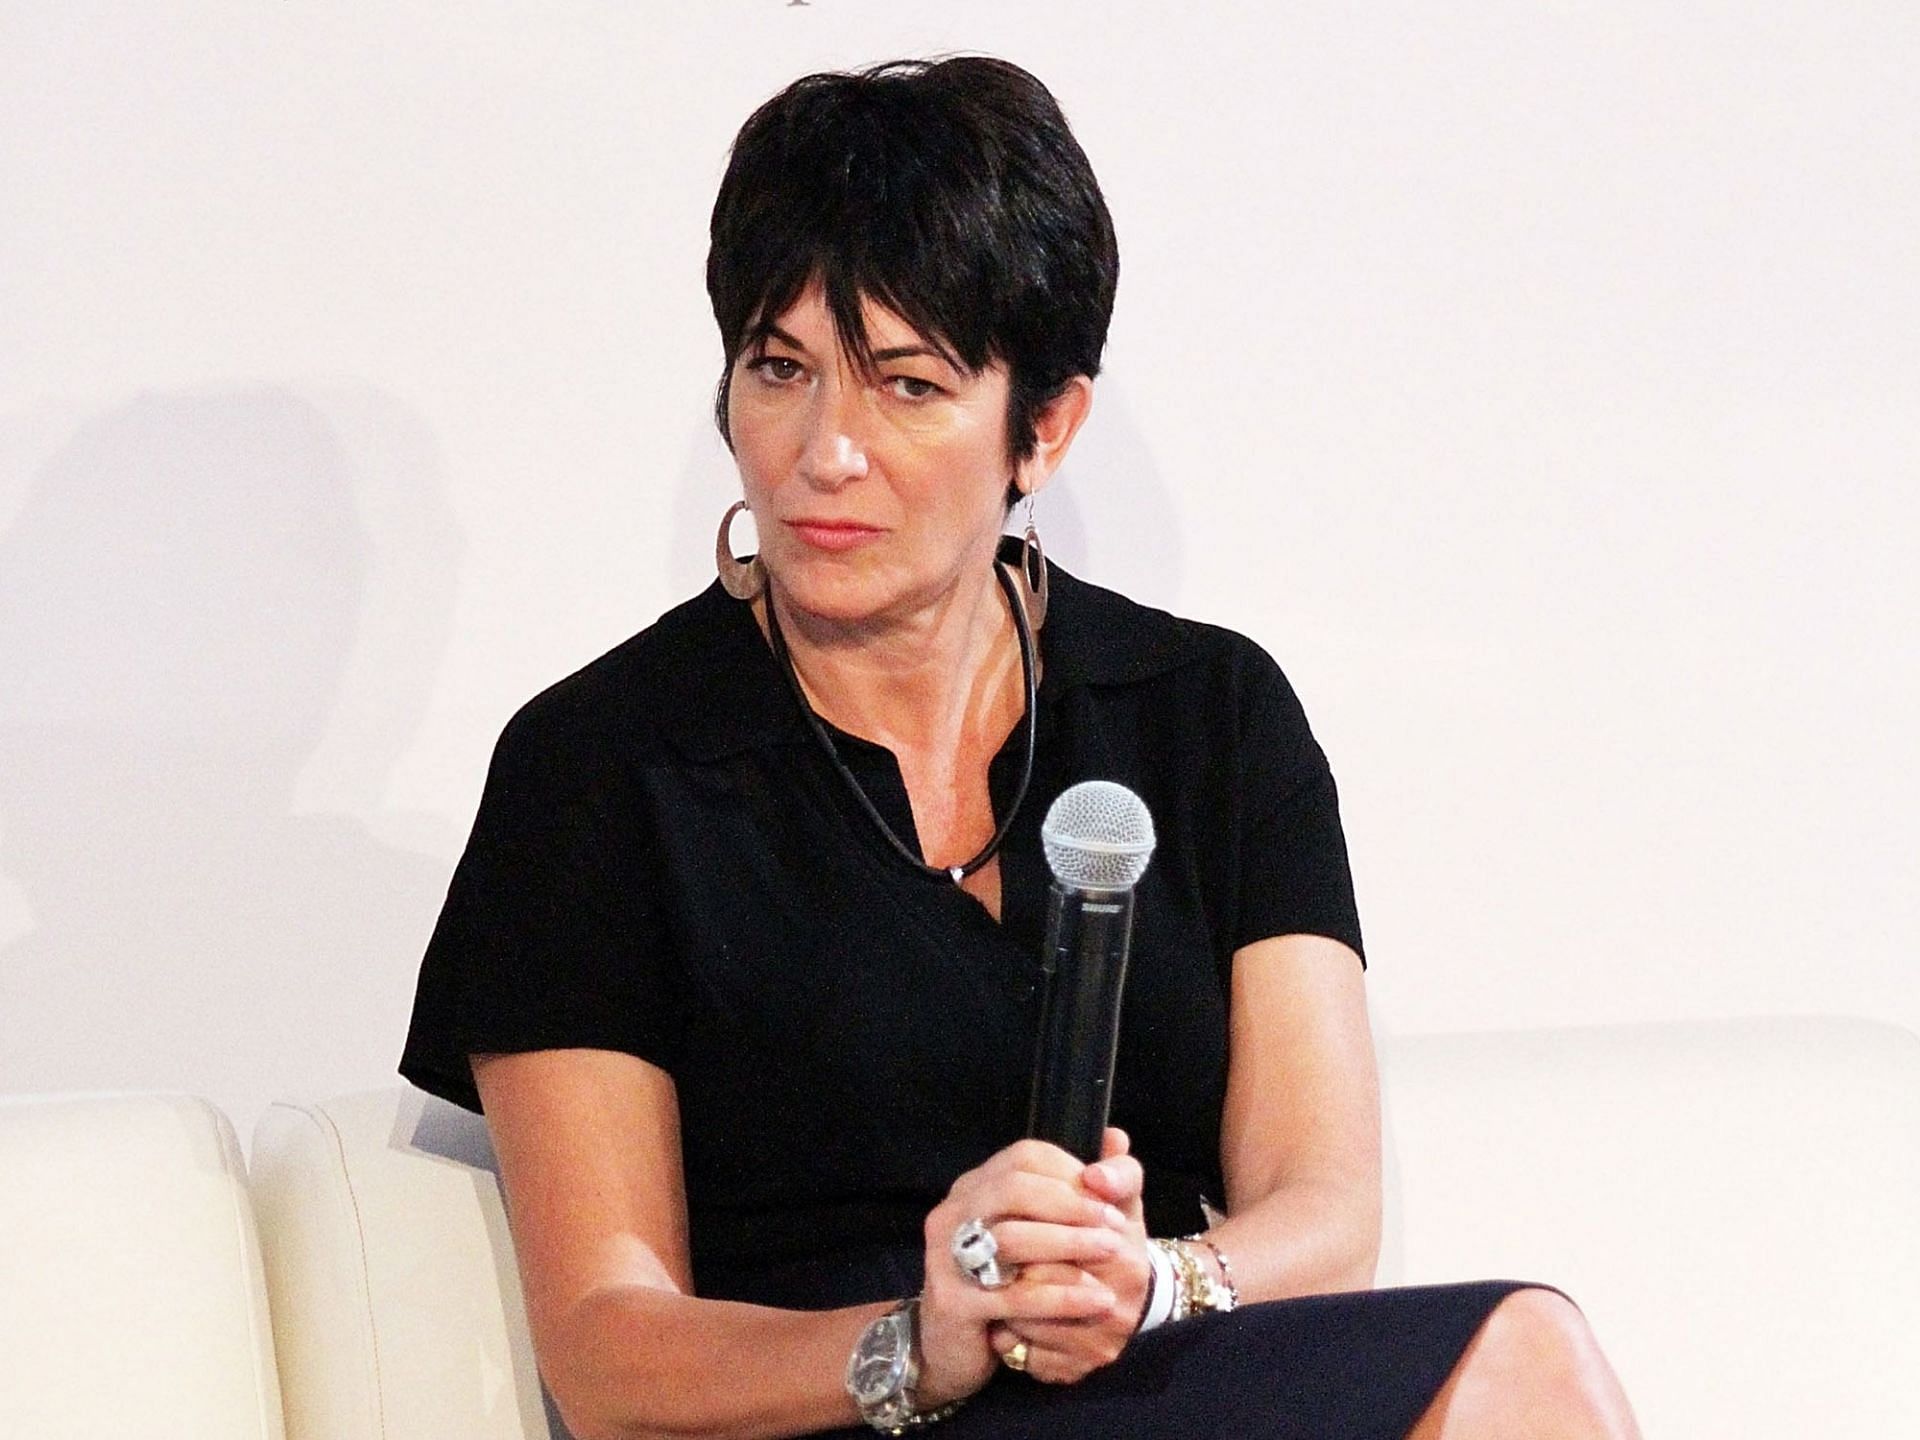 Ghislaine Maxwell was a close aide of Jeffrey Epstein (Image via Laura Cavanaugh/Getty Images)